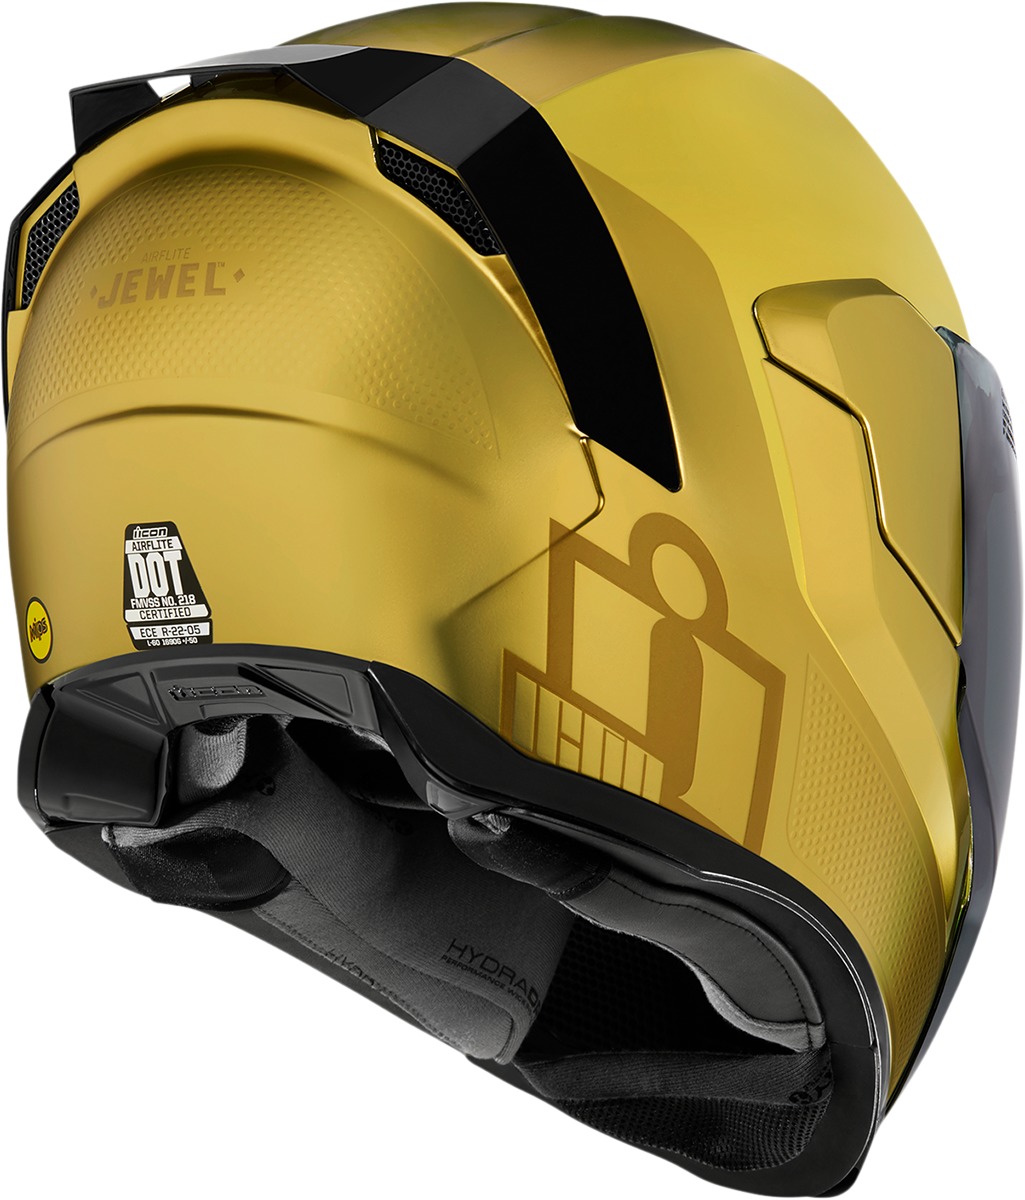 Gold Airflite Jewel MIPS Motorcycle Helmet - Medium - Meets ECE 22.05 and DOT FMVSS-218 Standards - Click Image to Close